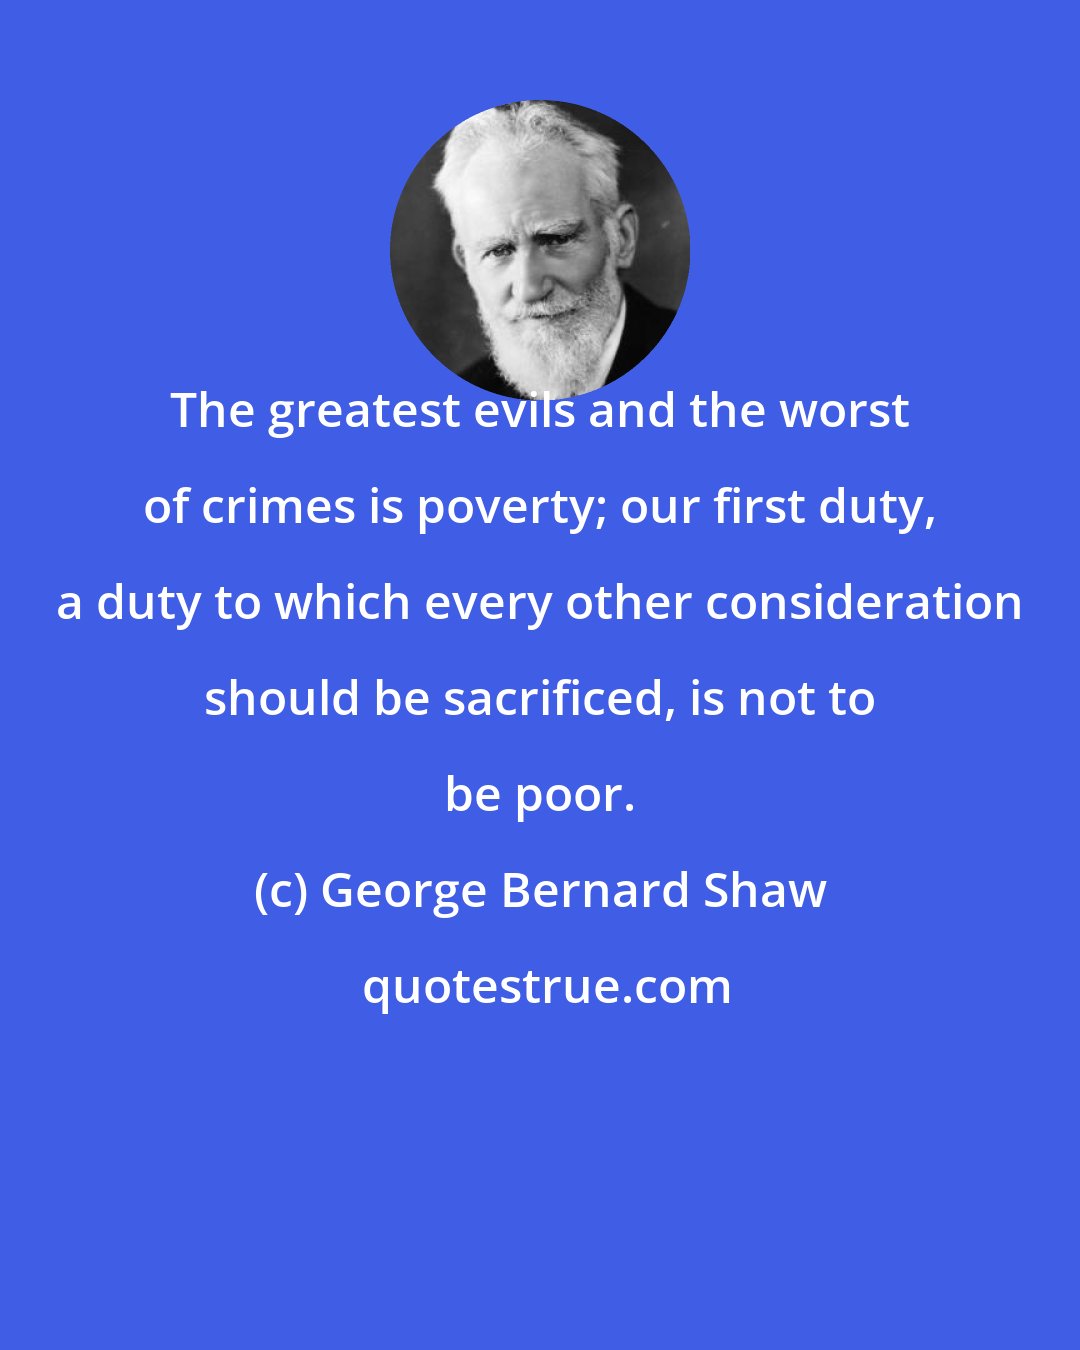 George Bernard Shaw: The greatest evils and the worst of crimes is poverty; our first duty, a duty to which every other consideration should be sacrificed, is not to be poor.